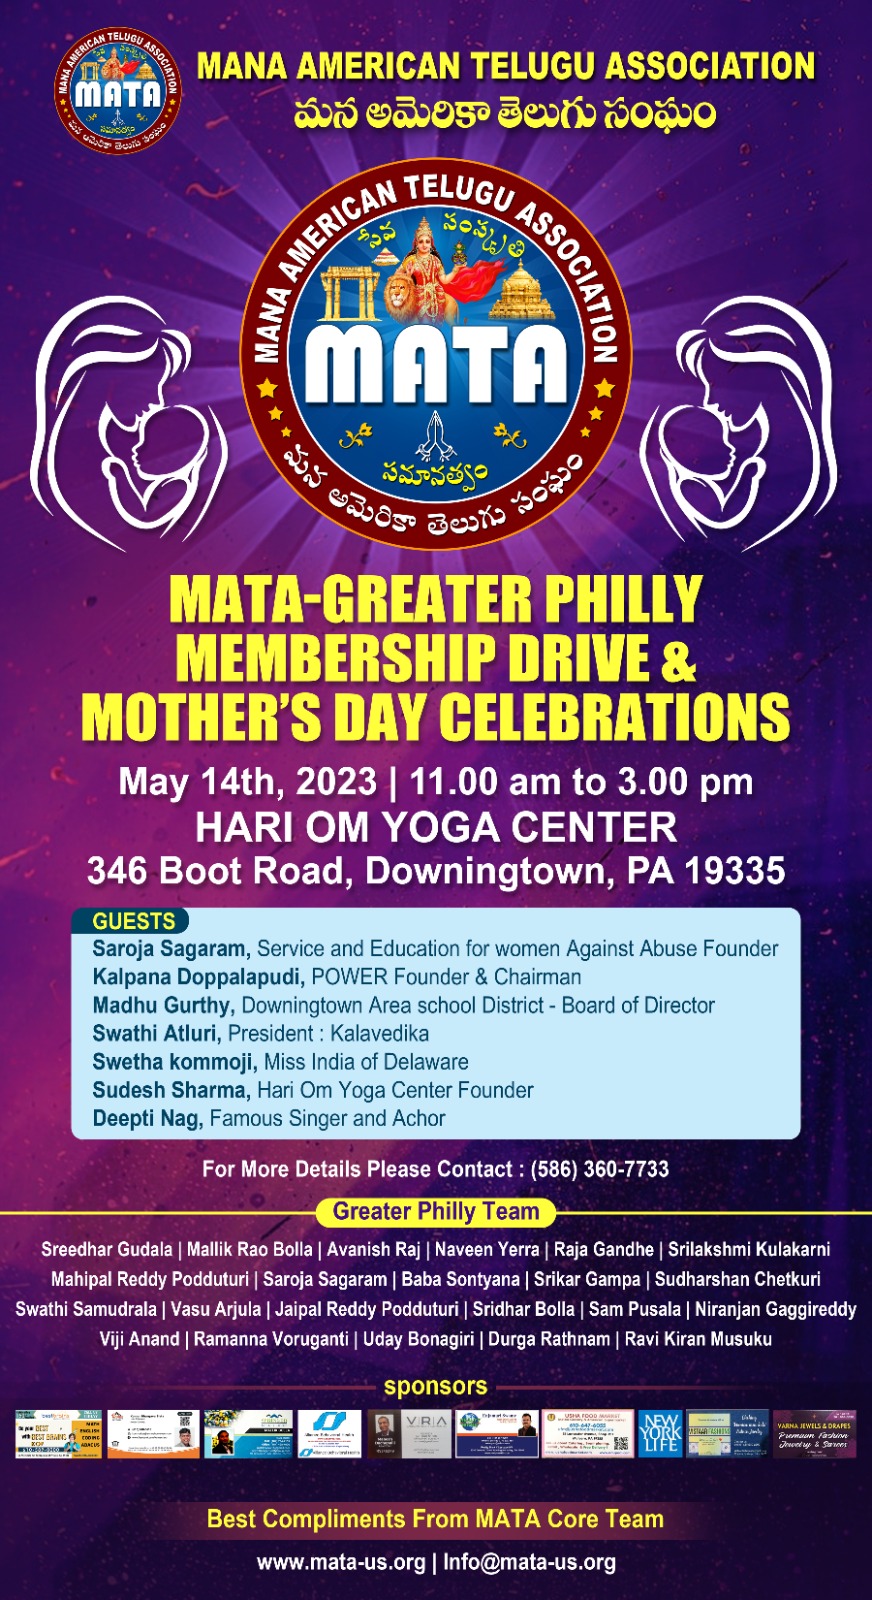 Mata Grater Philly Membership Drive & Mothers Day Celebrations